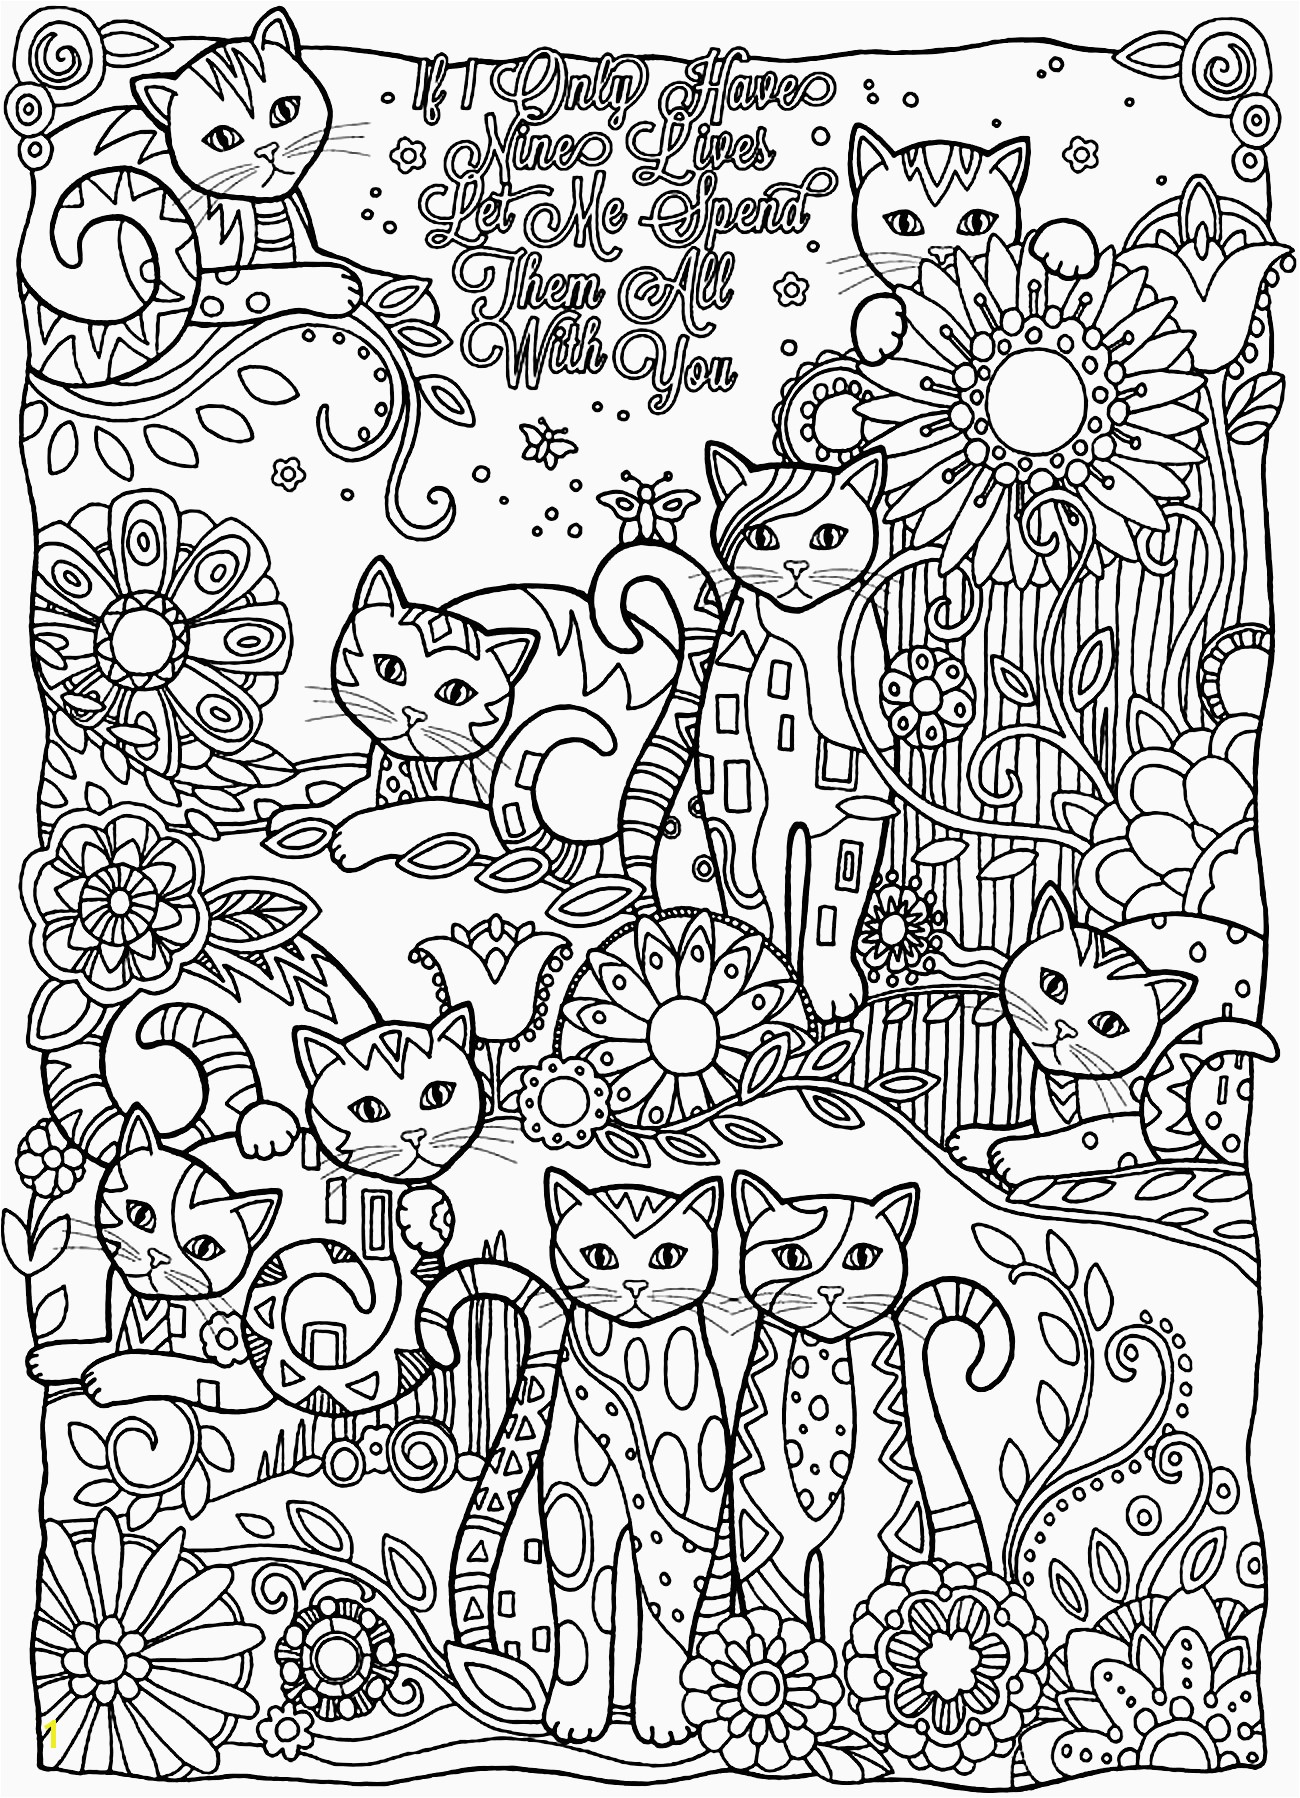 Free Printable Coloring Pages Adults ly Fresh Christmas Coloring Pages Printable Luxury Cool Od Dog Coloring